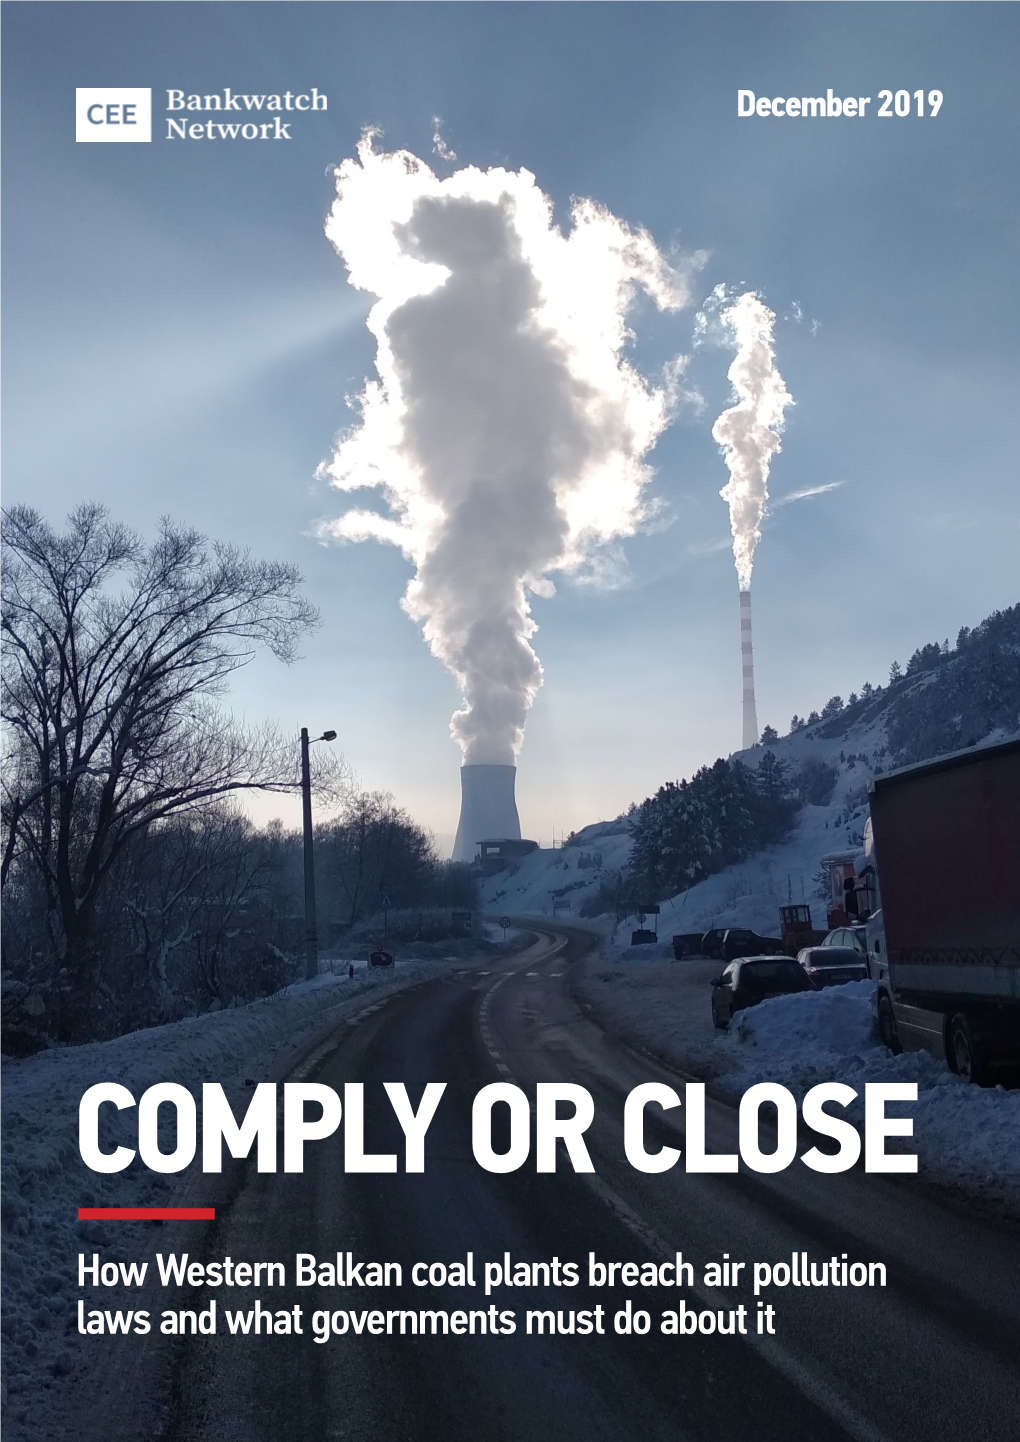 Large Combustion Plants Directive – Directive 2001/80/EC on the Limitation of Emissions of Certain Pollutants Into the Air from Large Combustion Plants